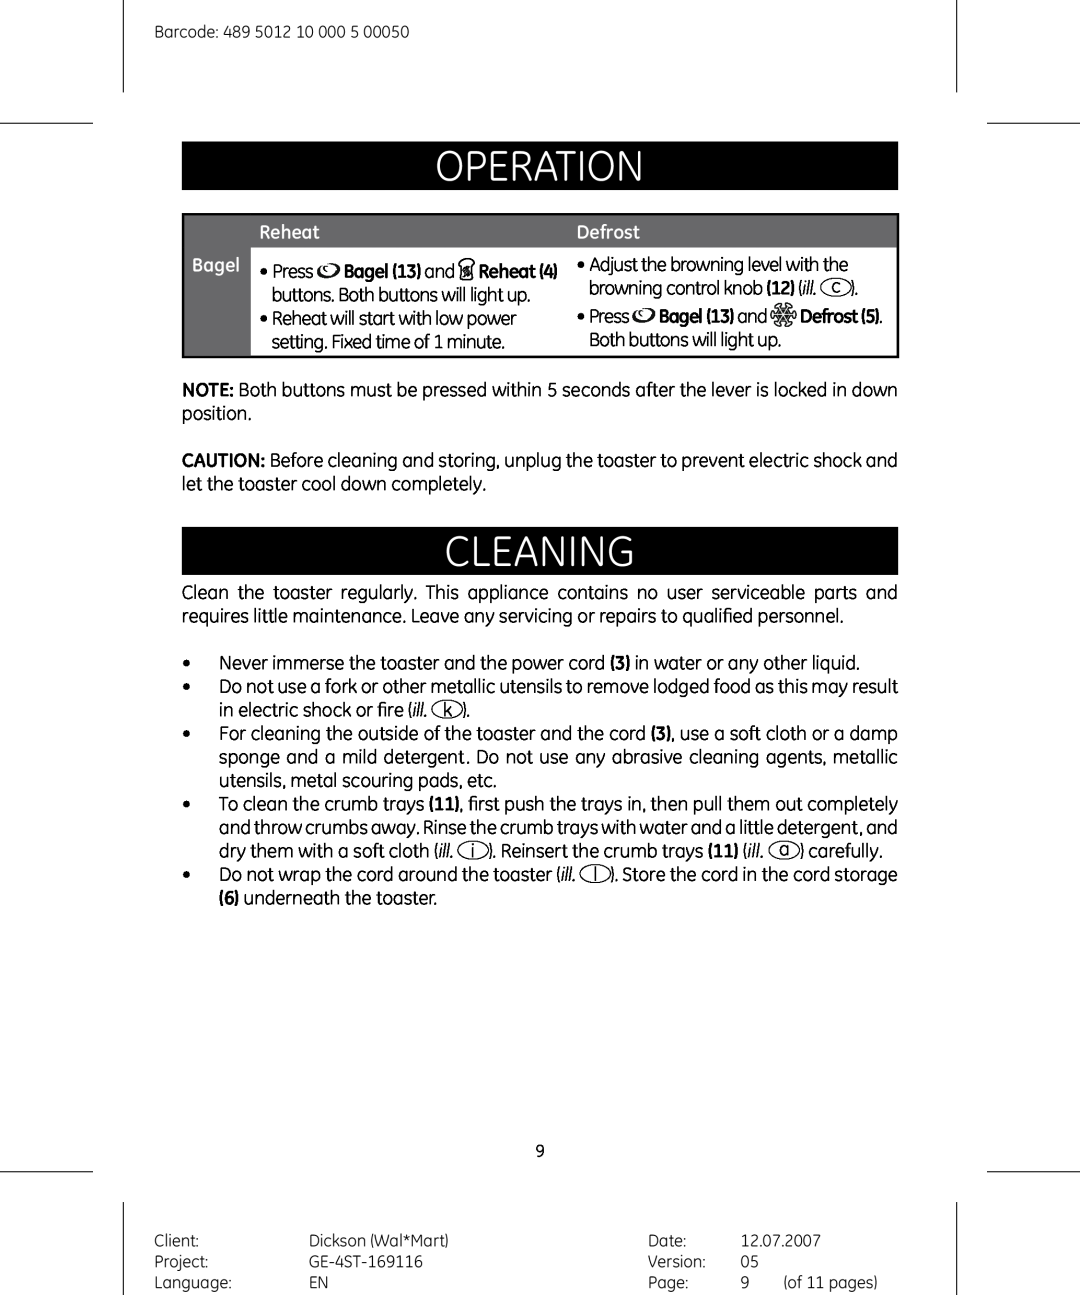 GE 681131691154 manual cleaning, Reheat, Defrost, operation 